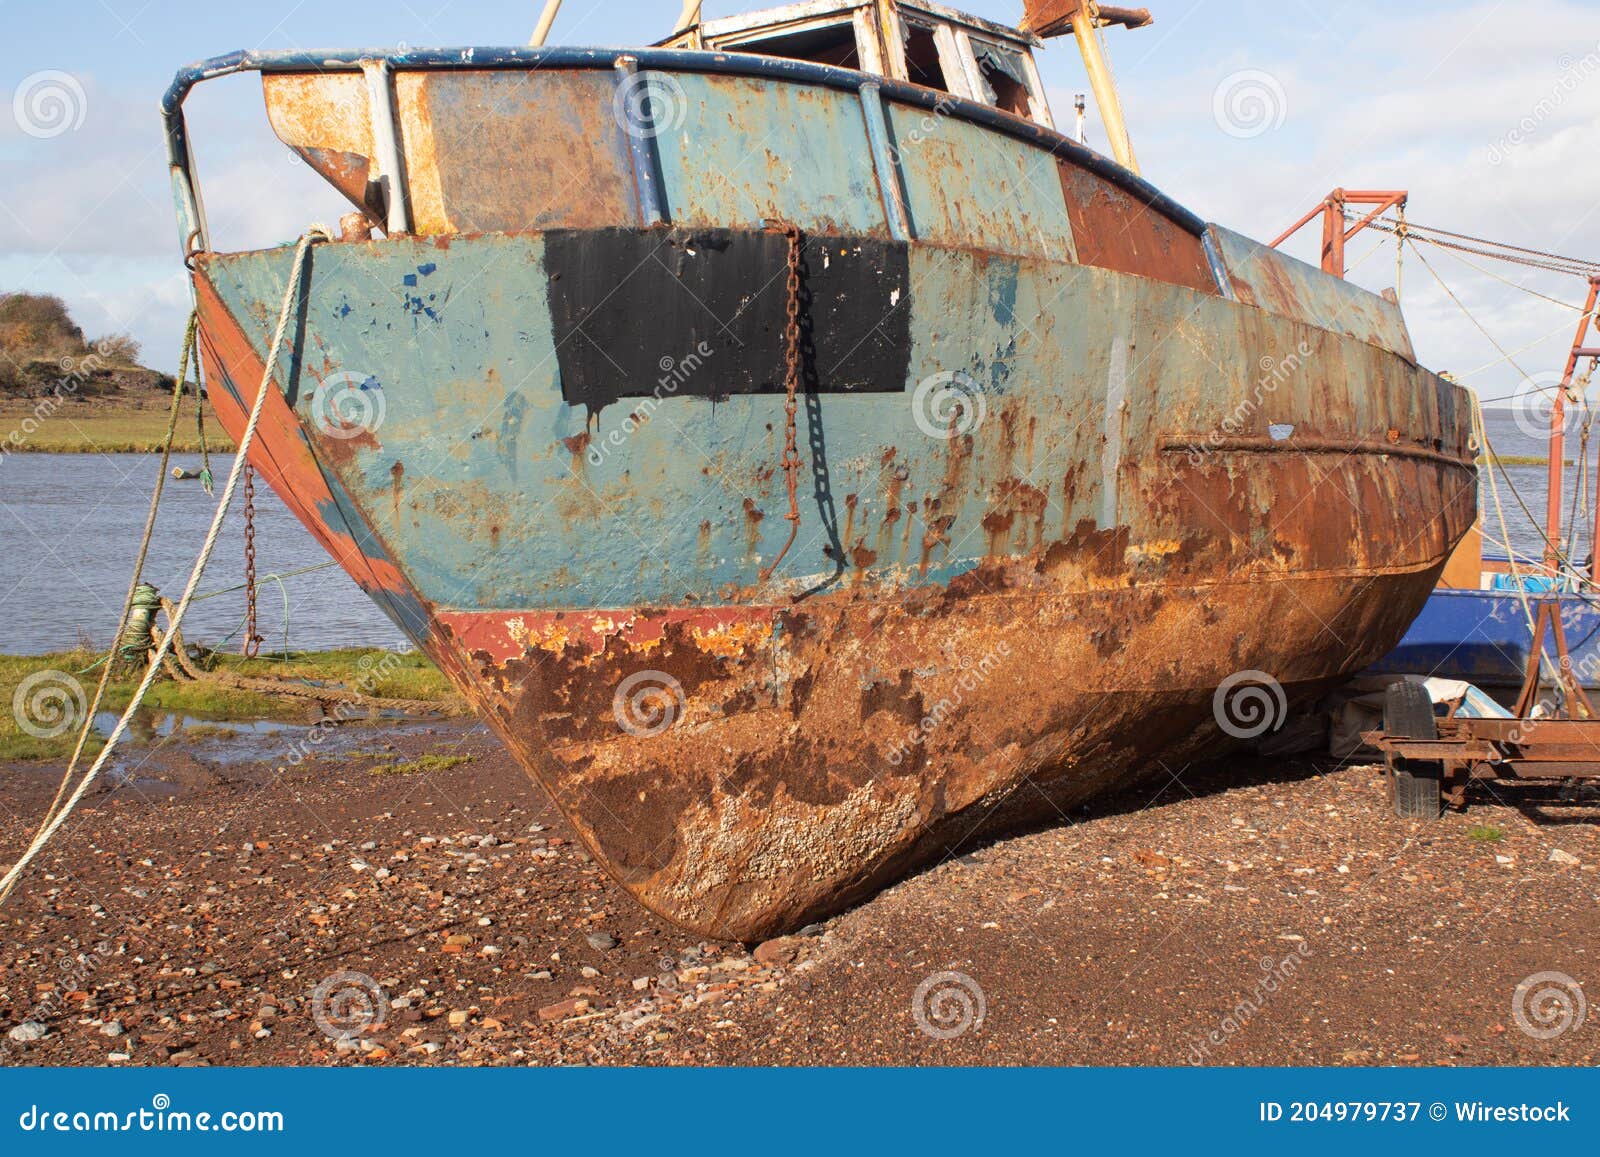 Rusting Hulk of a Fishing Boat in Bagillt Dock on the River Dee in Bagillt  Flintshire North Wales Stock Image - Image of river, water: 204979737